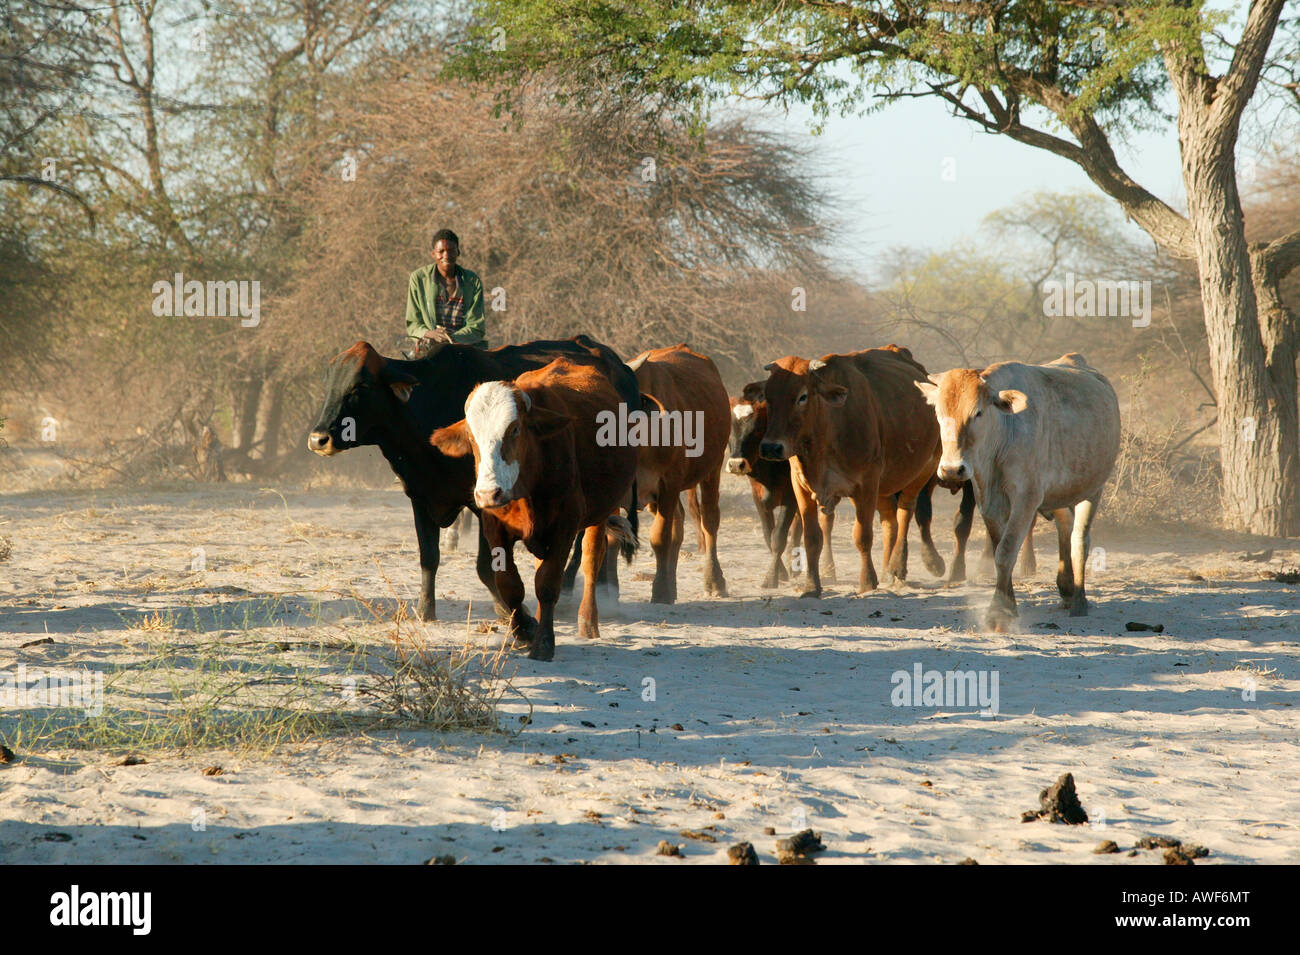 Cattle being herded to troughs, Cattlepost Bothatogo, Botswana, Africa Stock Photo